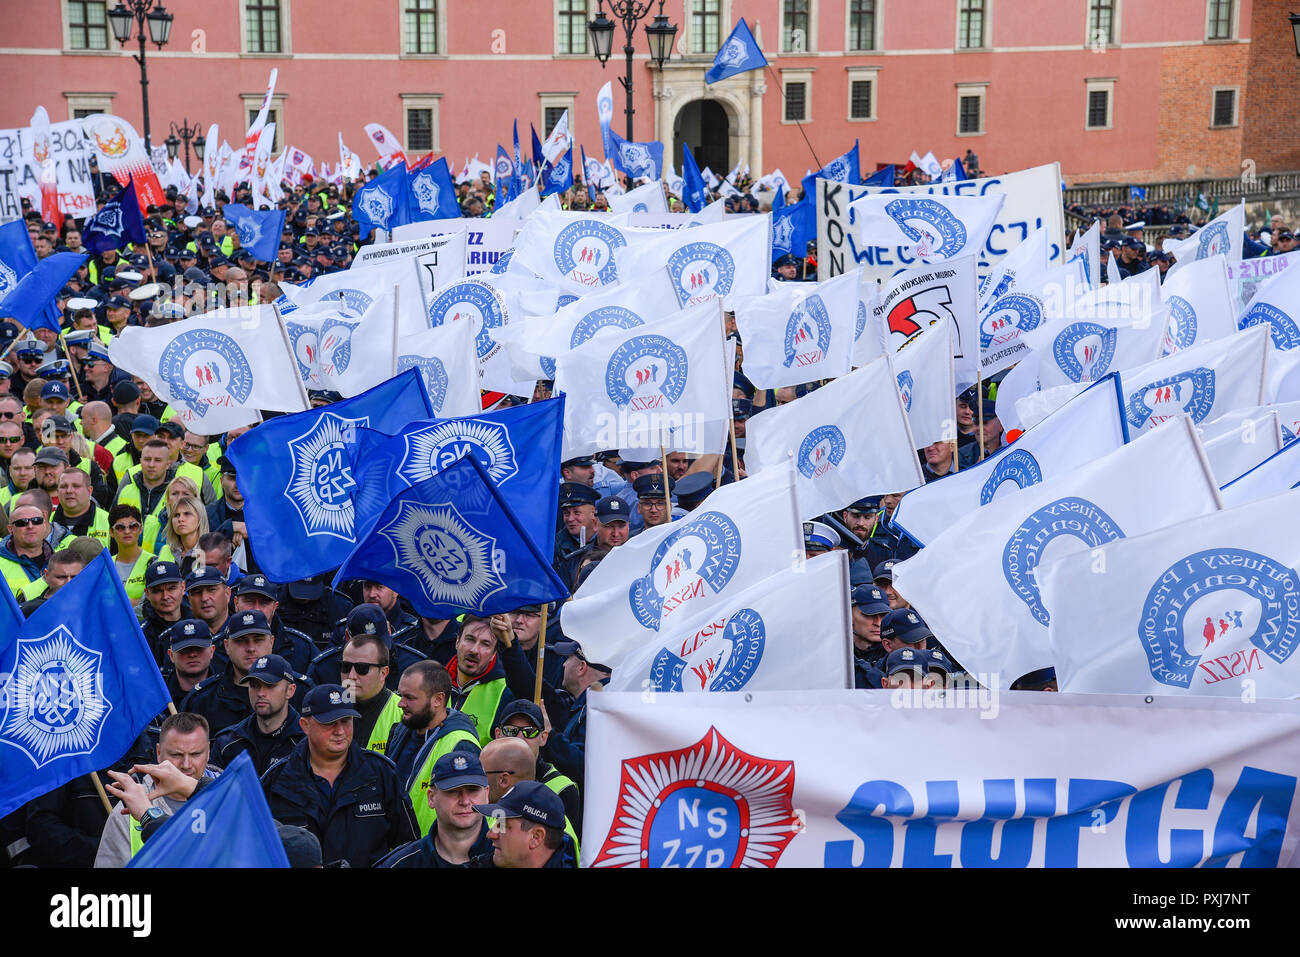 Warsaw / Poland - October.02.2018: Demonstration, national protest of police officers for fair work wages. Crowd of police officers. Stock Photo